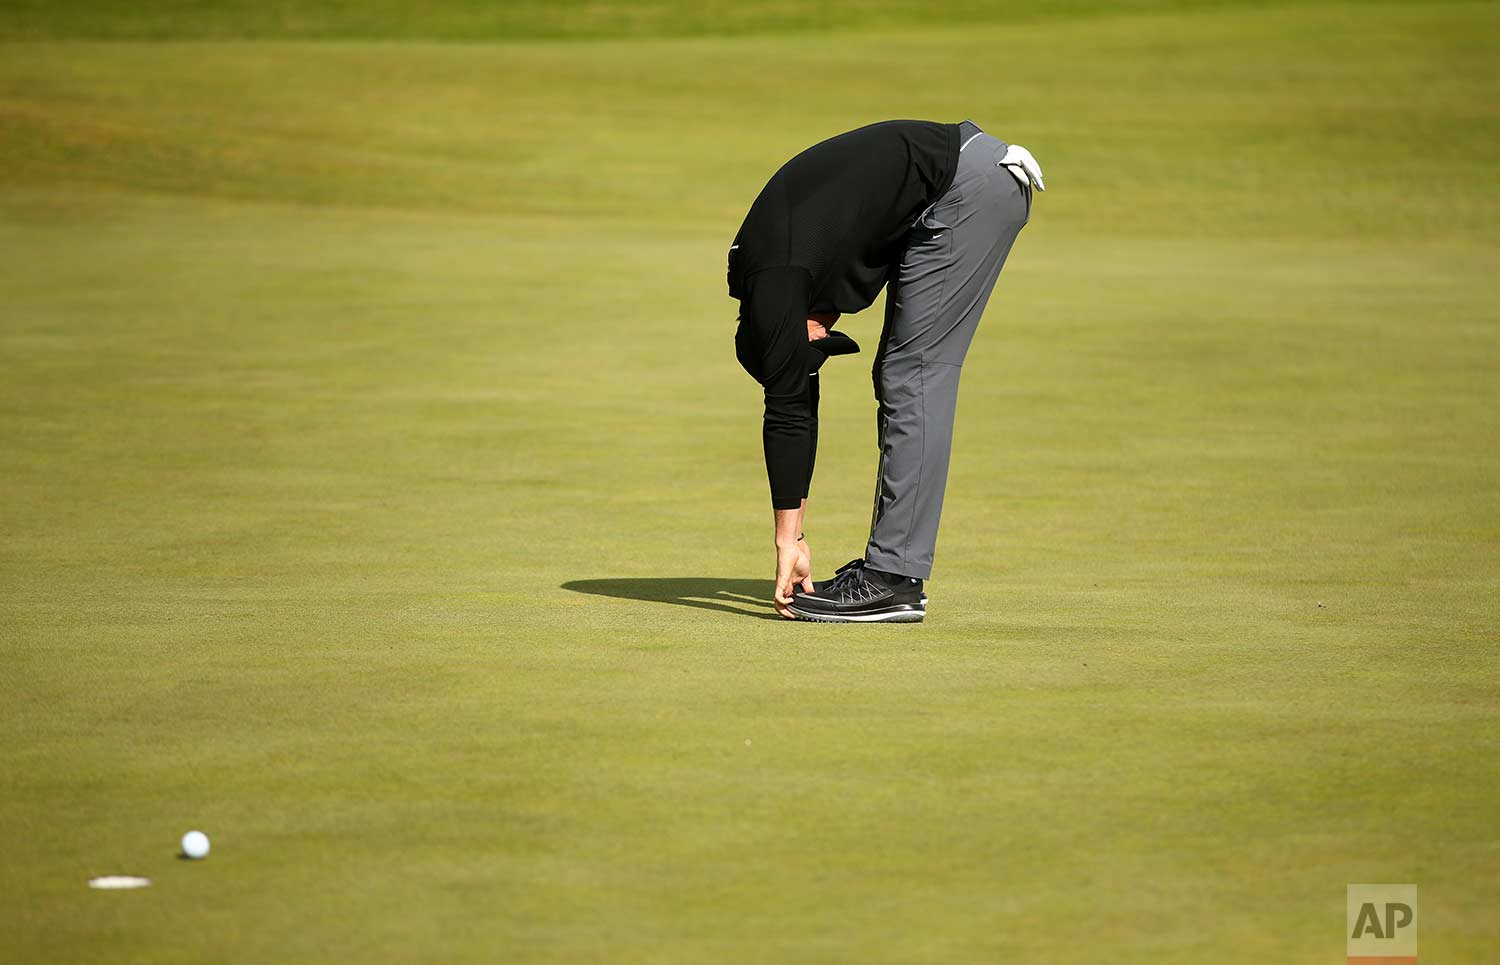  In this Saturday July 22, 2017 photo, Northern Ireland's Rory McIlroy reacts to a missed putt on the 4th green during the third round of the British Open Golf Championship, at Royal Birkdale, Southport, England. (AP Photo/Dave Thompson) 